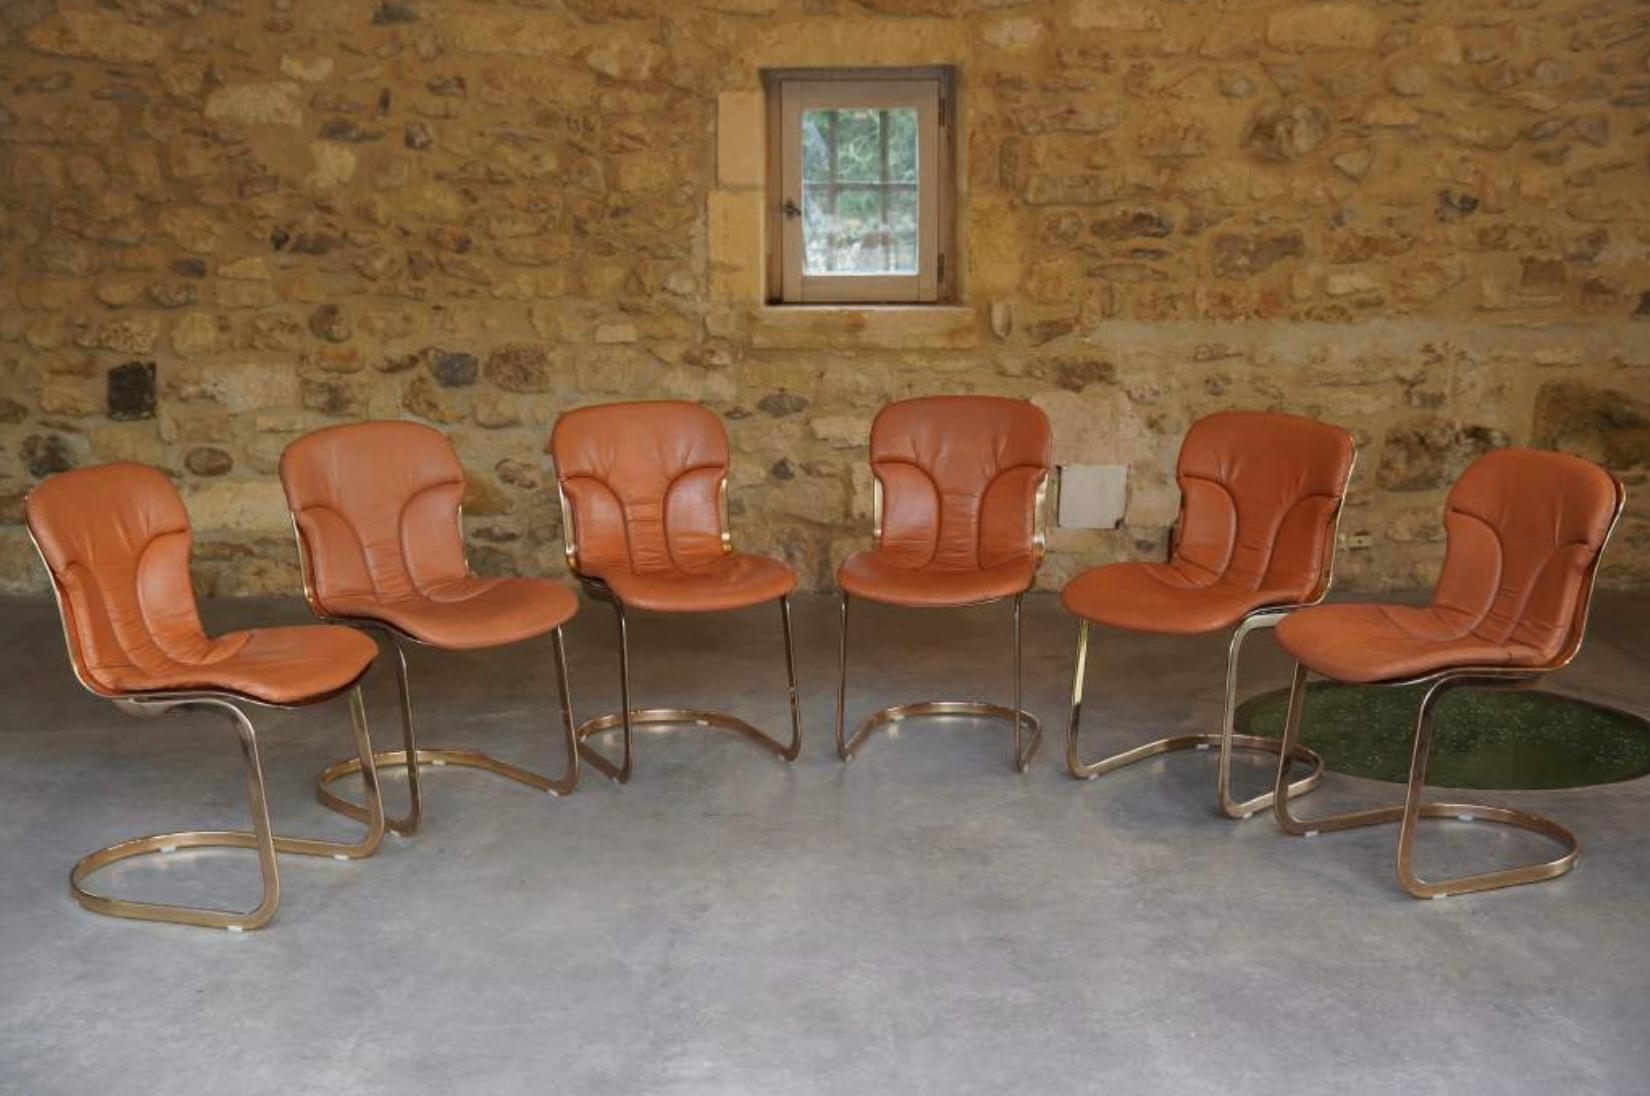 Chic set of 6 matching cognac brown leather chairs designed by Willy Rizzo for Cidue, Italy 1970’s.

All in excellent vintage condition. Excellent patina to the leather commensurate with age. Chair sits atop brass cantilever legs. 

Wonderful